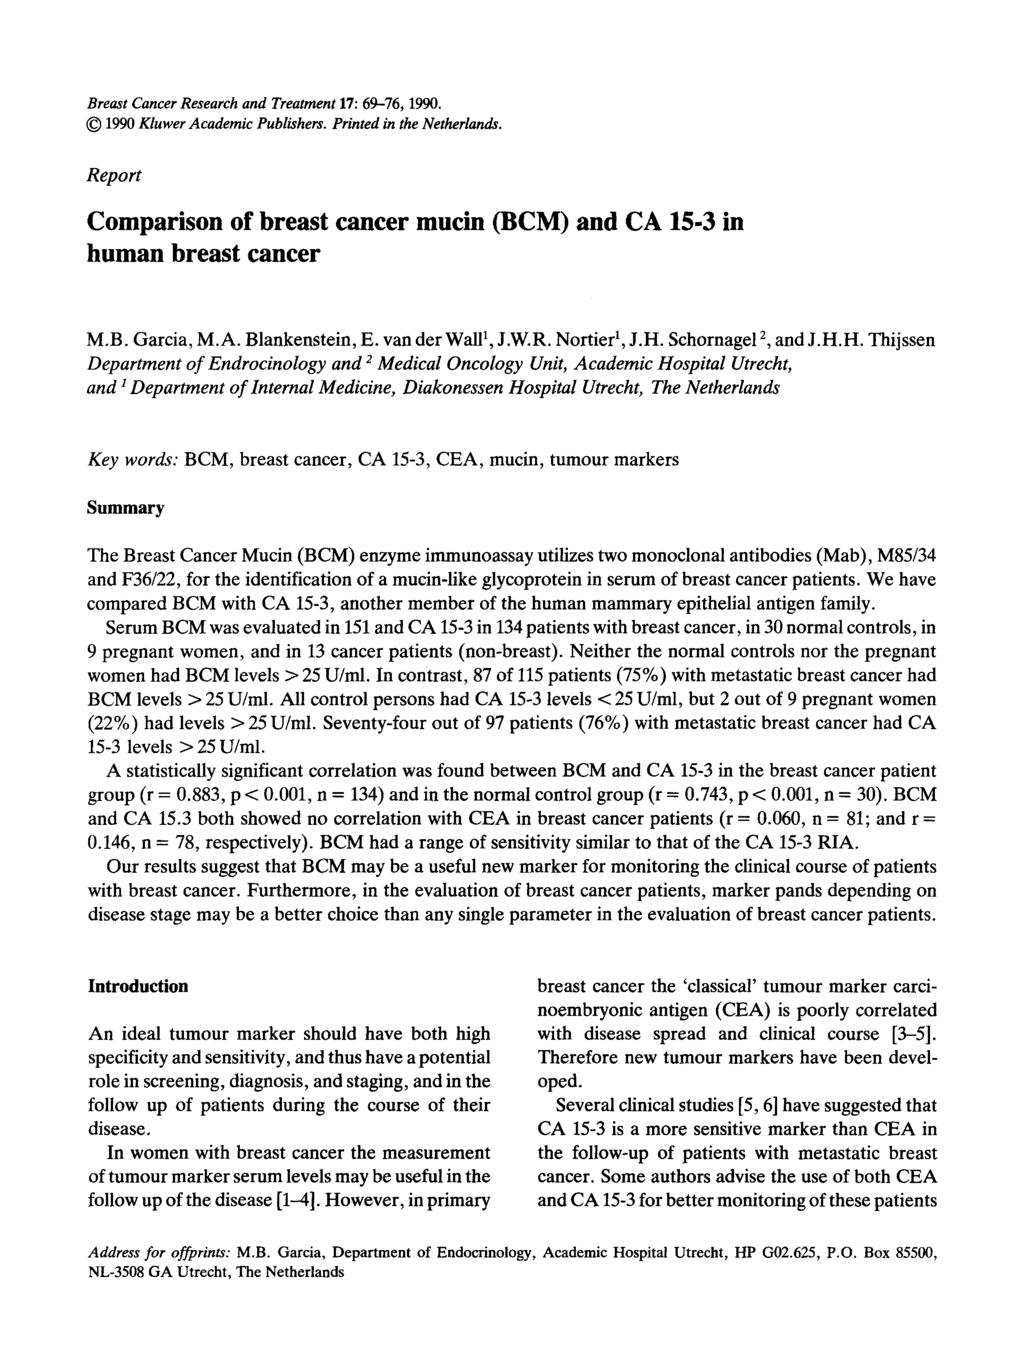 Breast Cancer Research and Treatment 17: 69-76, 1990. 1990 Kluwer Academic Publishers. Printed in the Netherlands. Report Comparison of breast cancer mucin (BCM) and CA 15-3 in human breast cancer M.